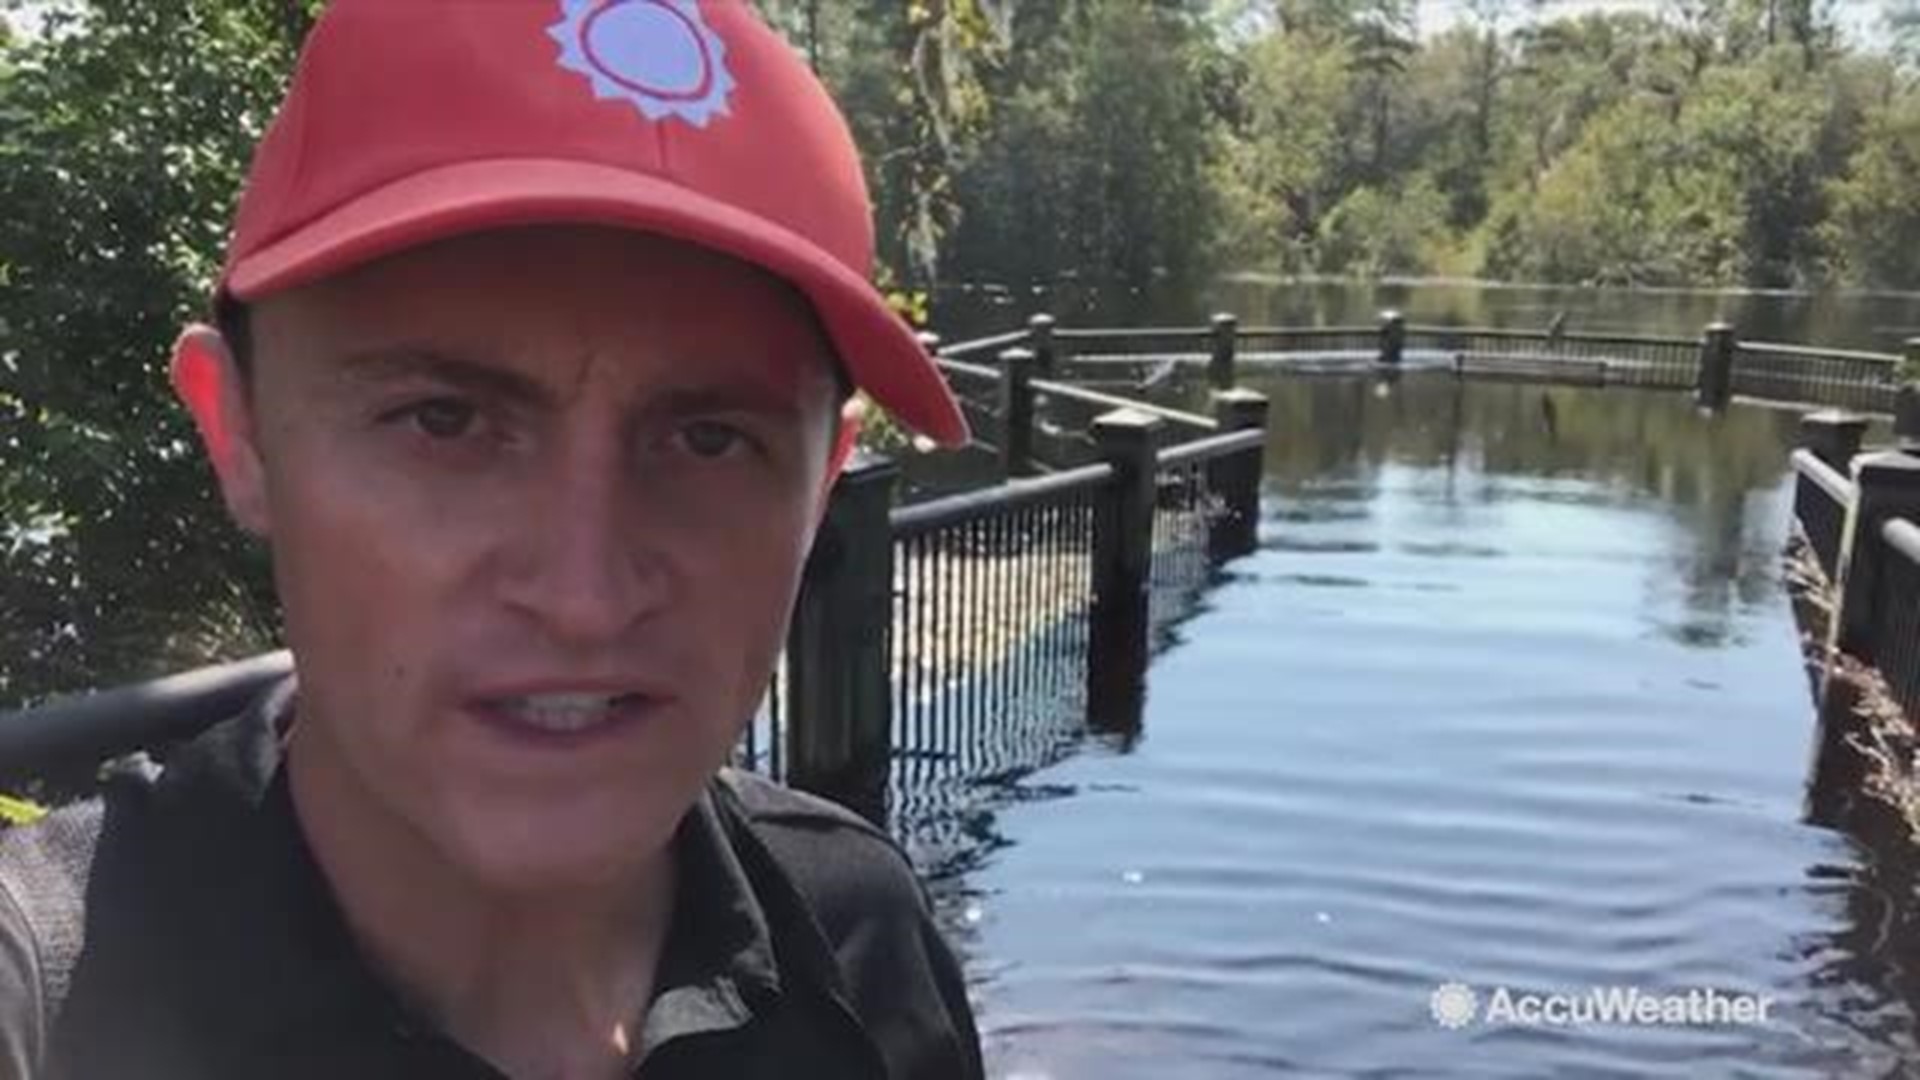 AccuWeather's Jonathan Petramala reports from Conway, South Carolina on how fast the waters are rising from the Waccamaw River. The waters are expected to rise to historic highs by the middle of next week.